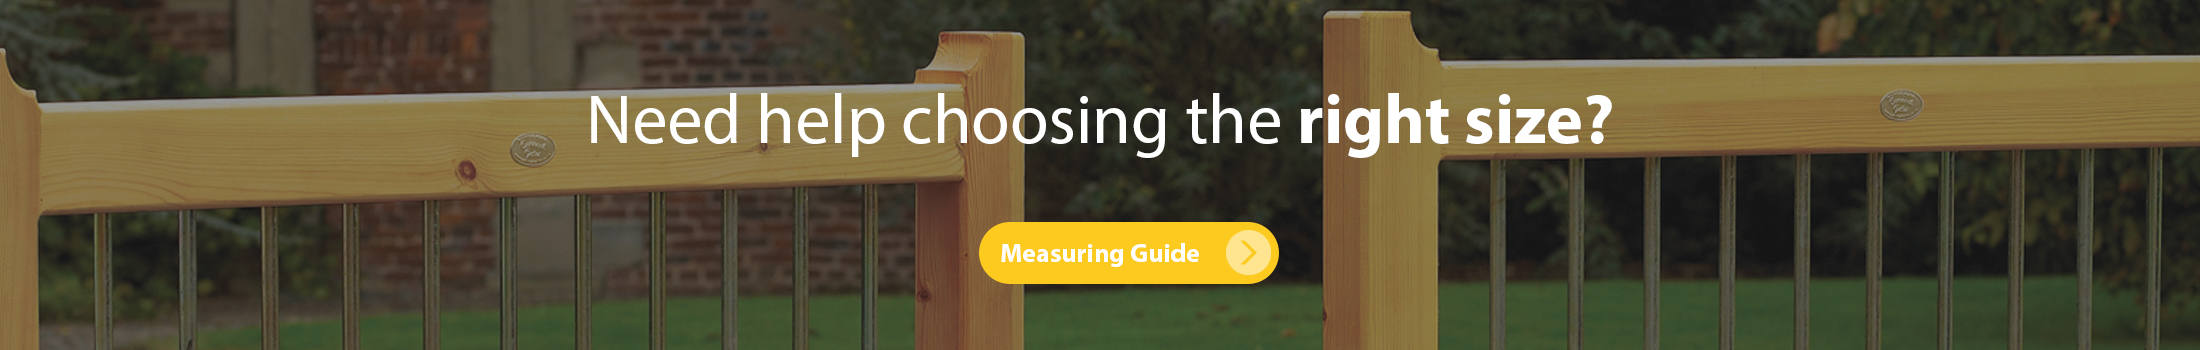 Read the measuring guide for help and advice choosing the size to order